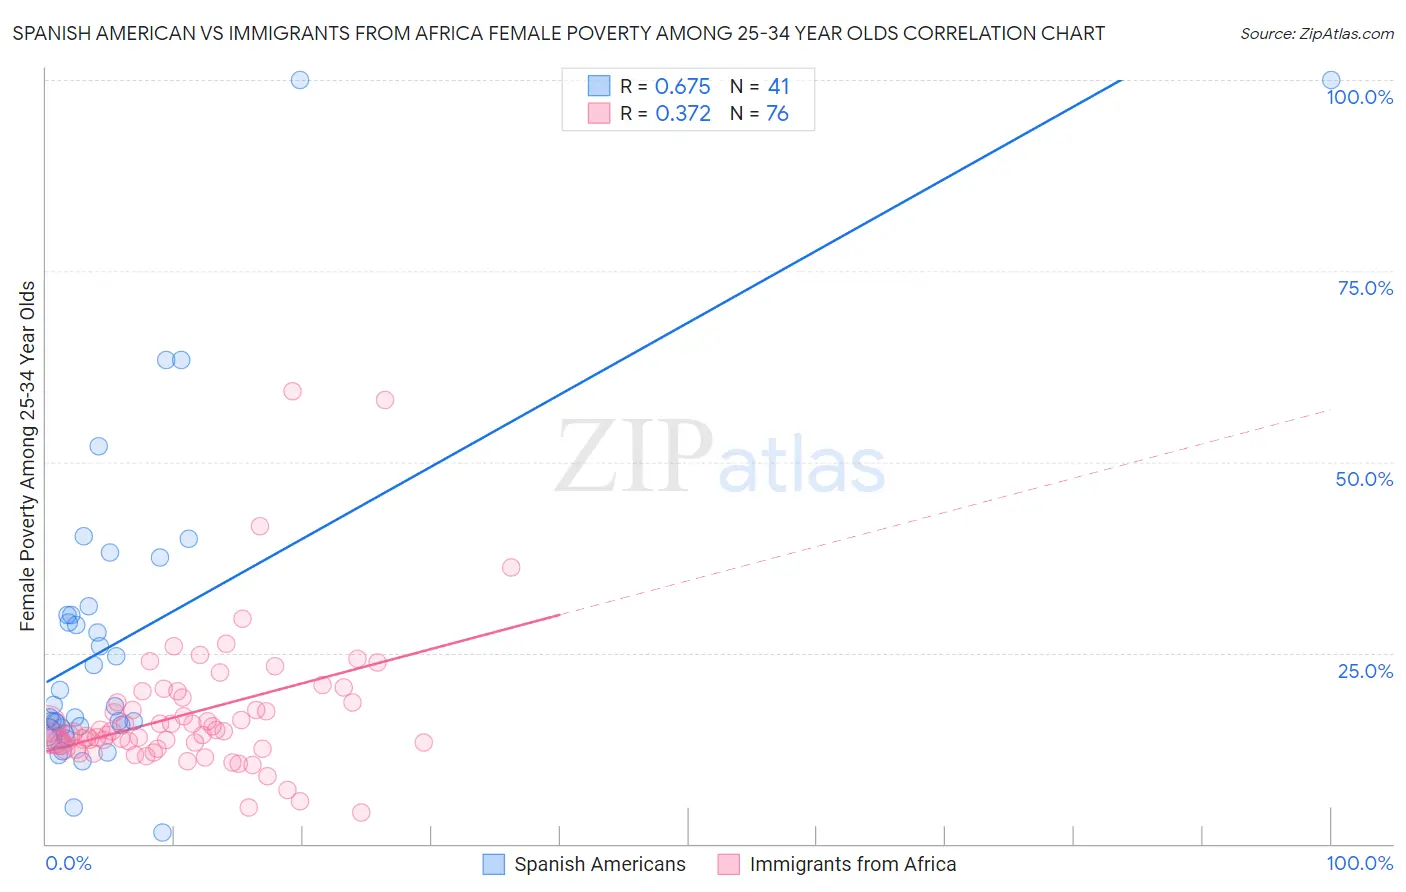 Spanish American vs Immigrants from Africa Female Poverty Among 25-34 Year Olds